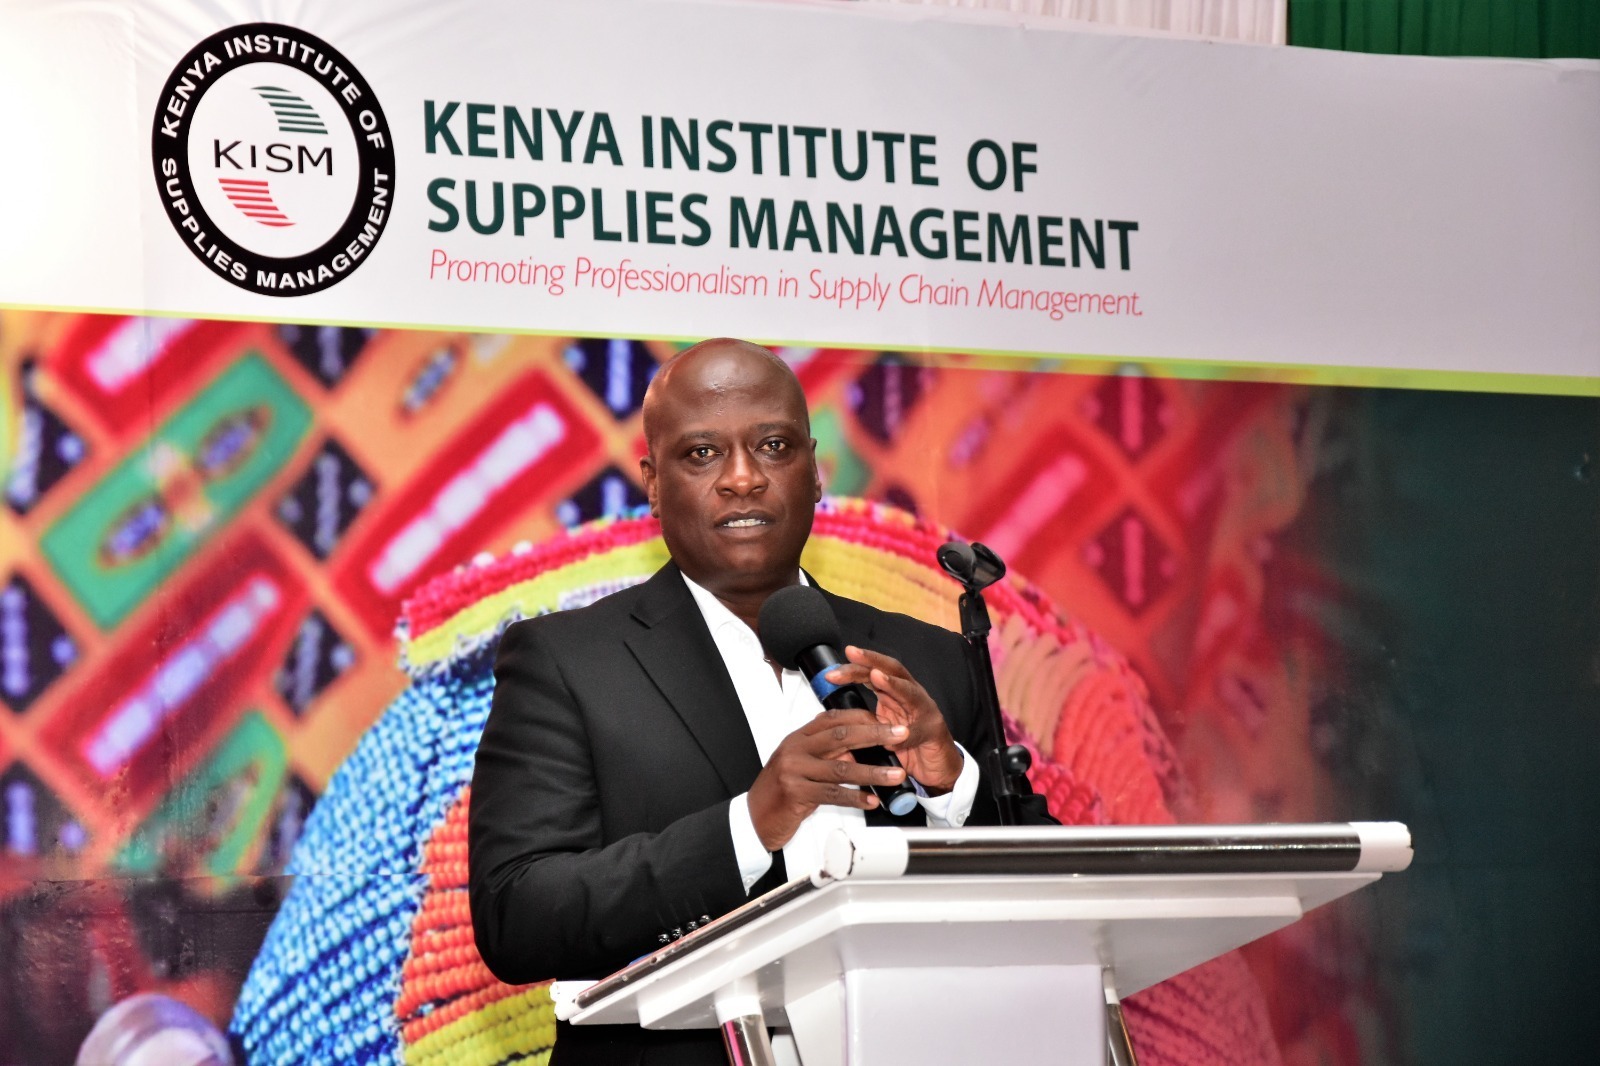 Harness Connectivity for Business Growth in Africa, Procurement Officers Urged